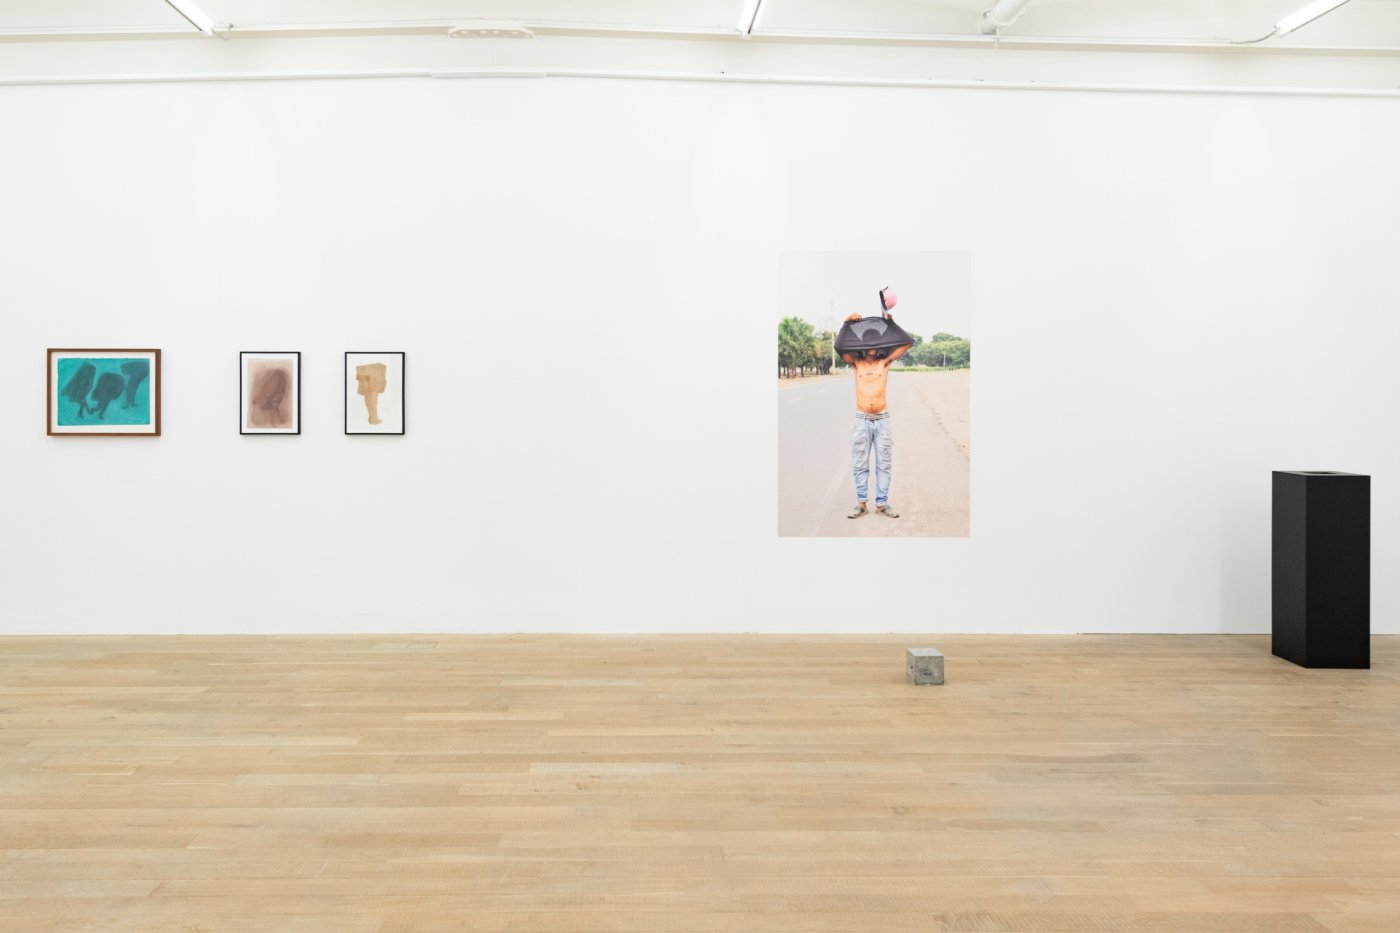 Installation image for The Other Side of the Mirror is Home, at Galerie Peter Kilchmann